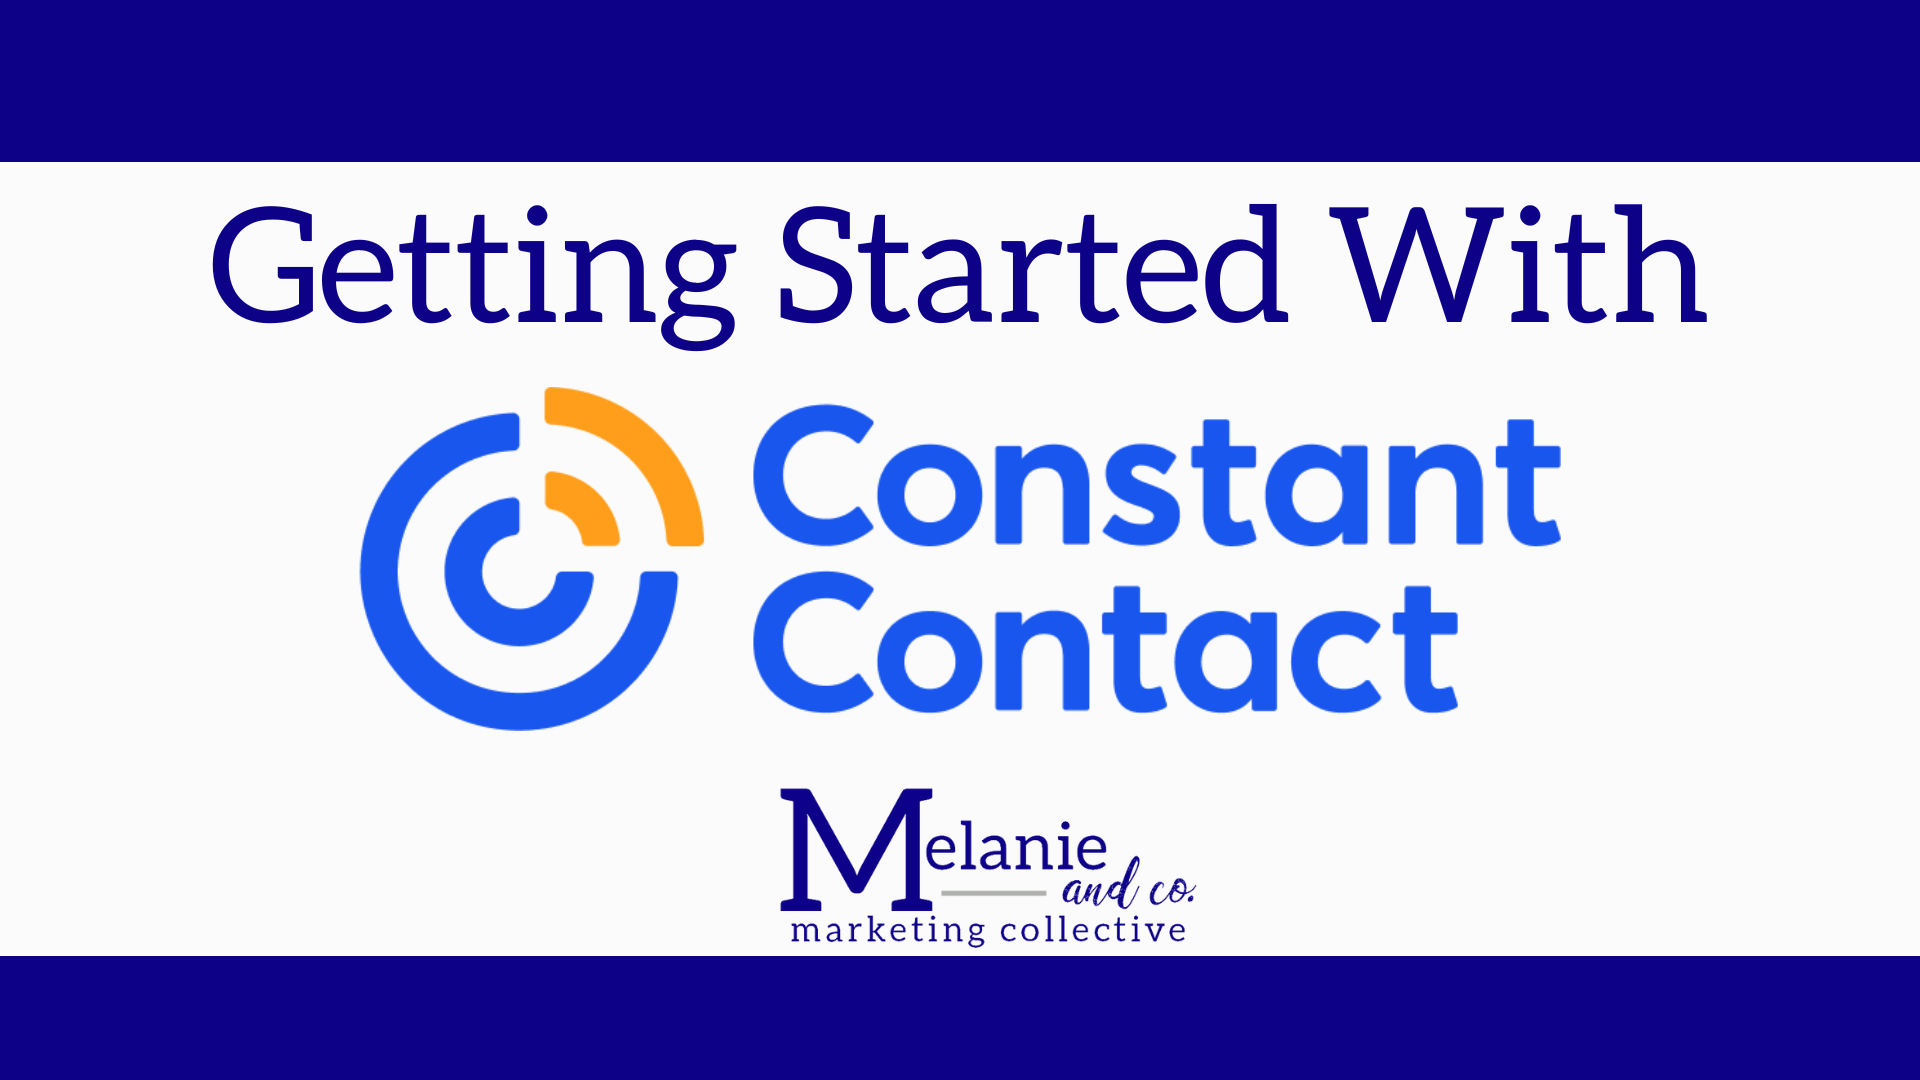 Constant Contact: Getting Started